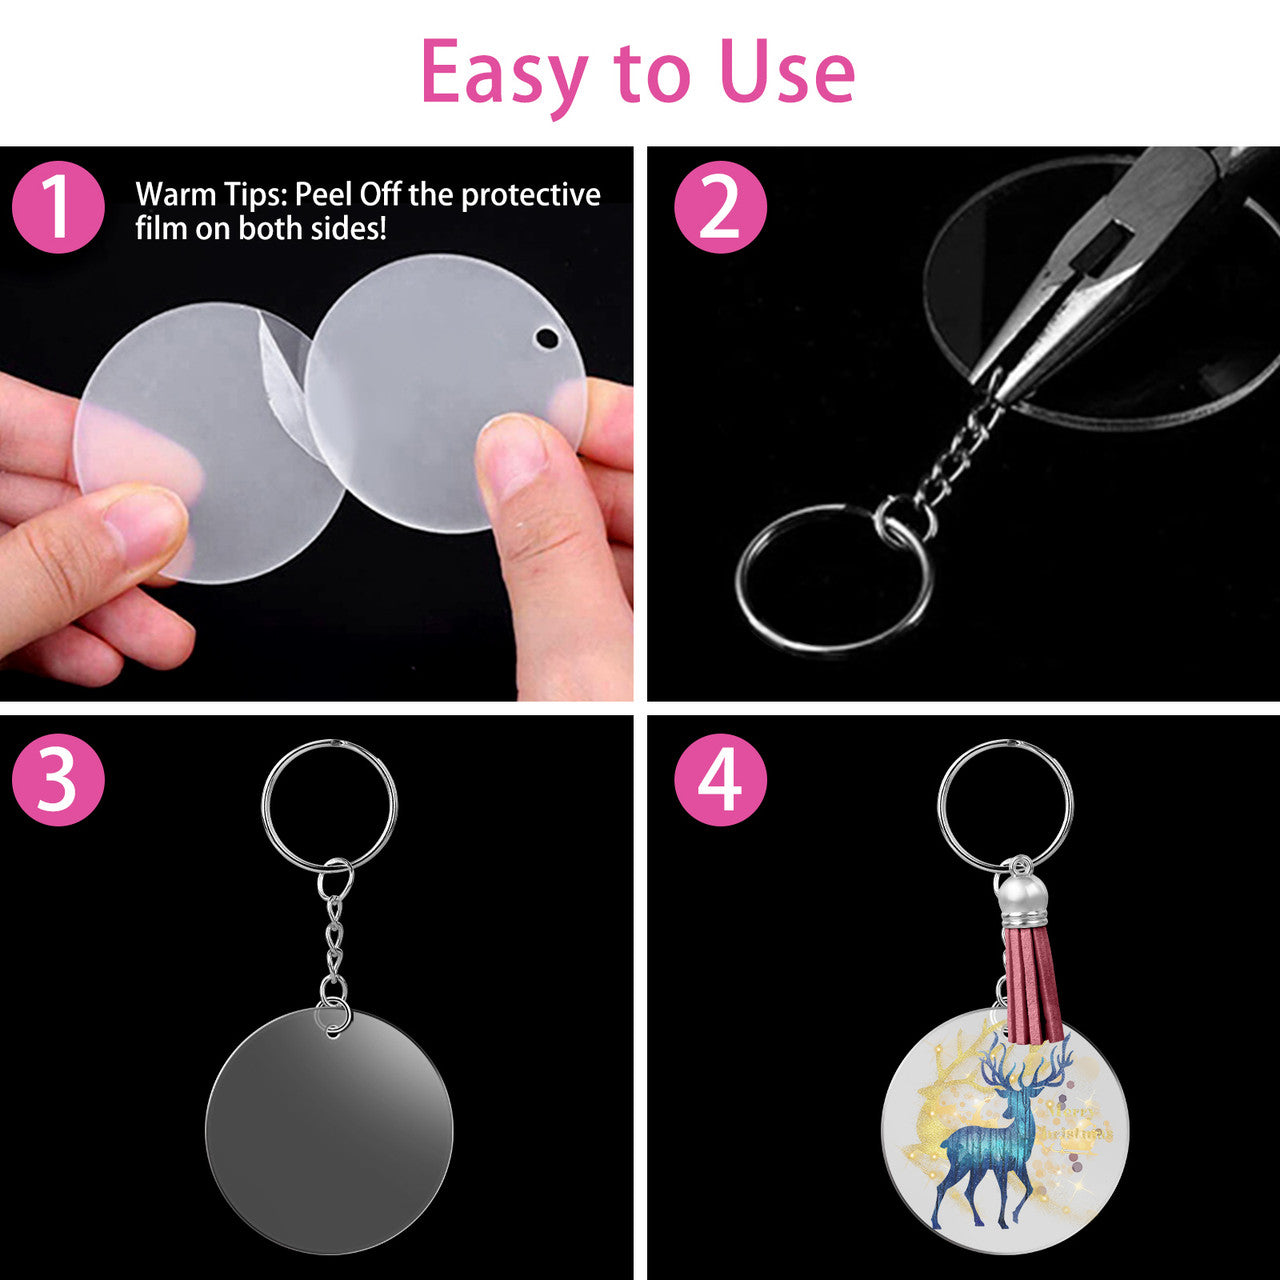 Clear Keychain Blanks for Vinyl with Acrylic Discs, Keychain Tassels,Key Rings with Chain,Jump Rings